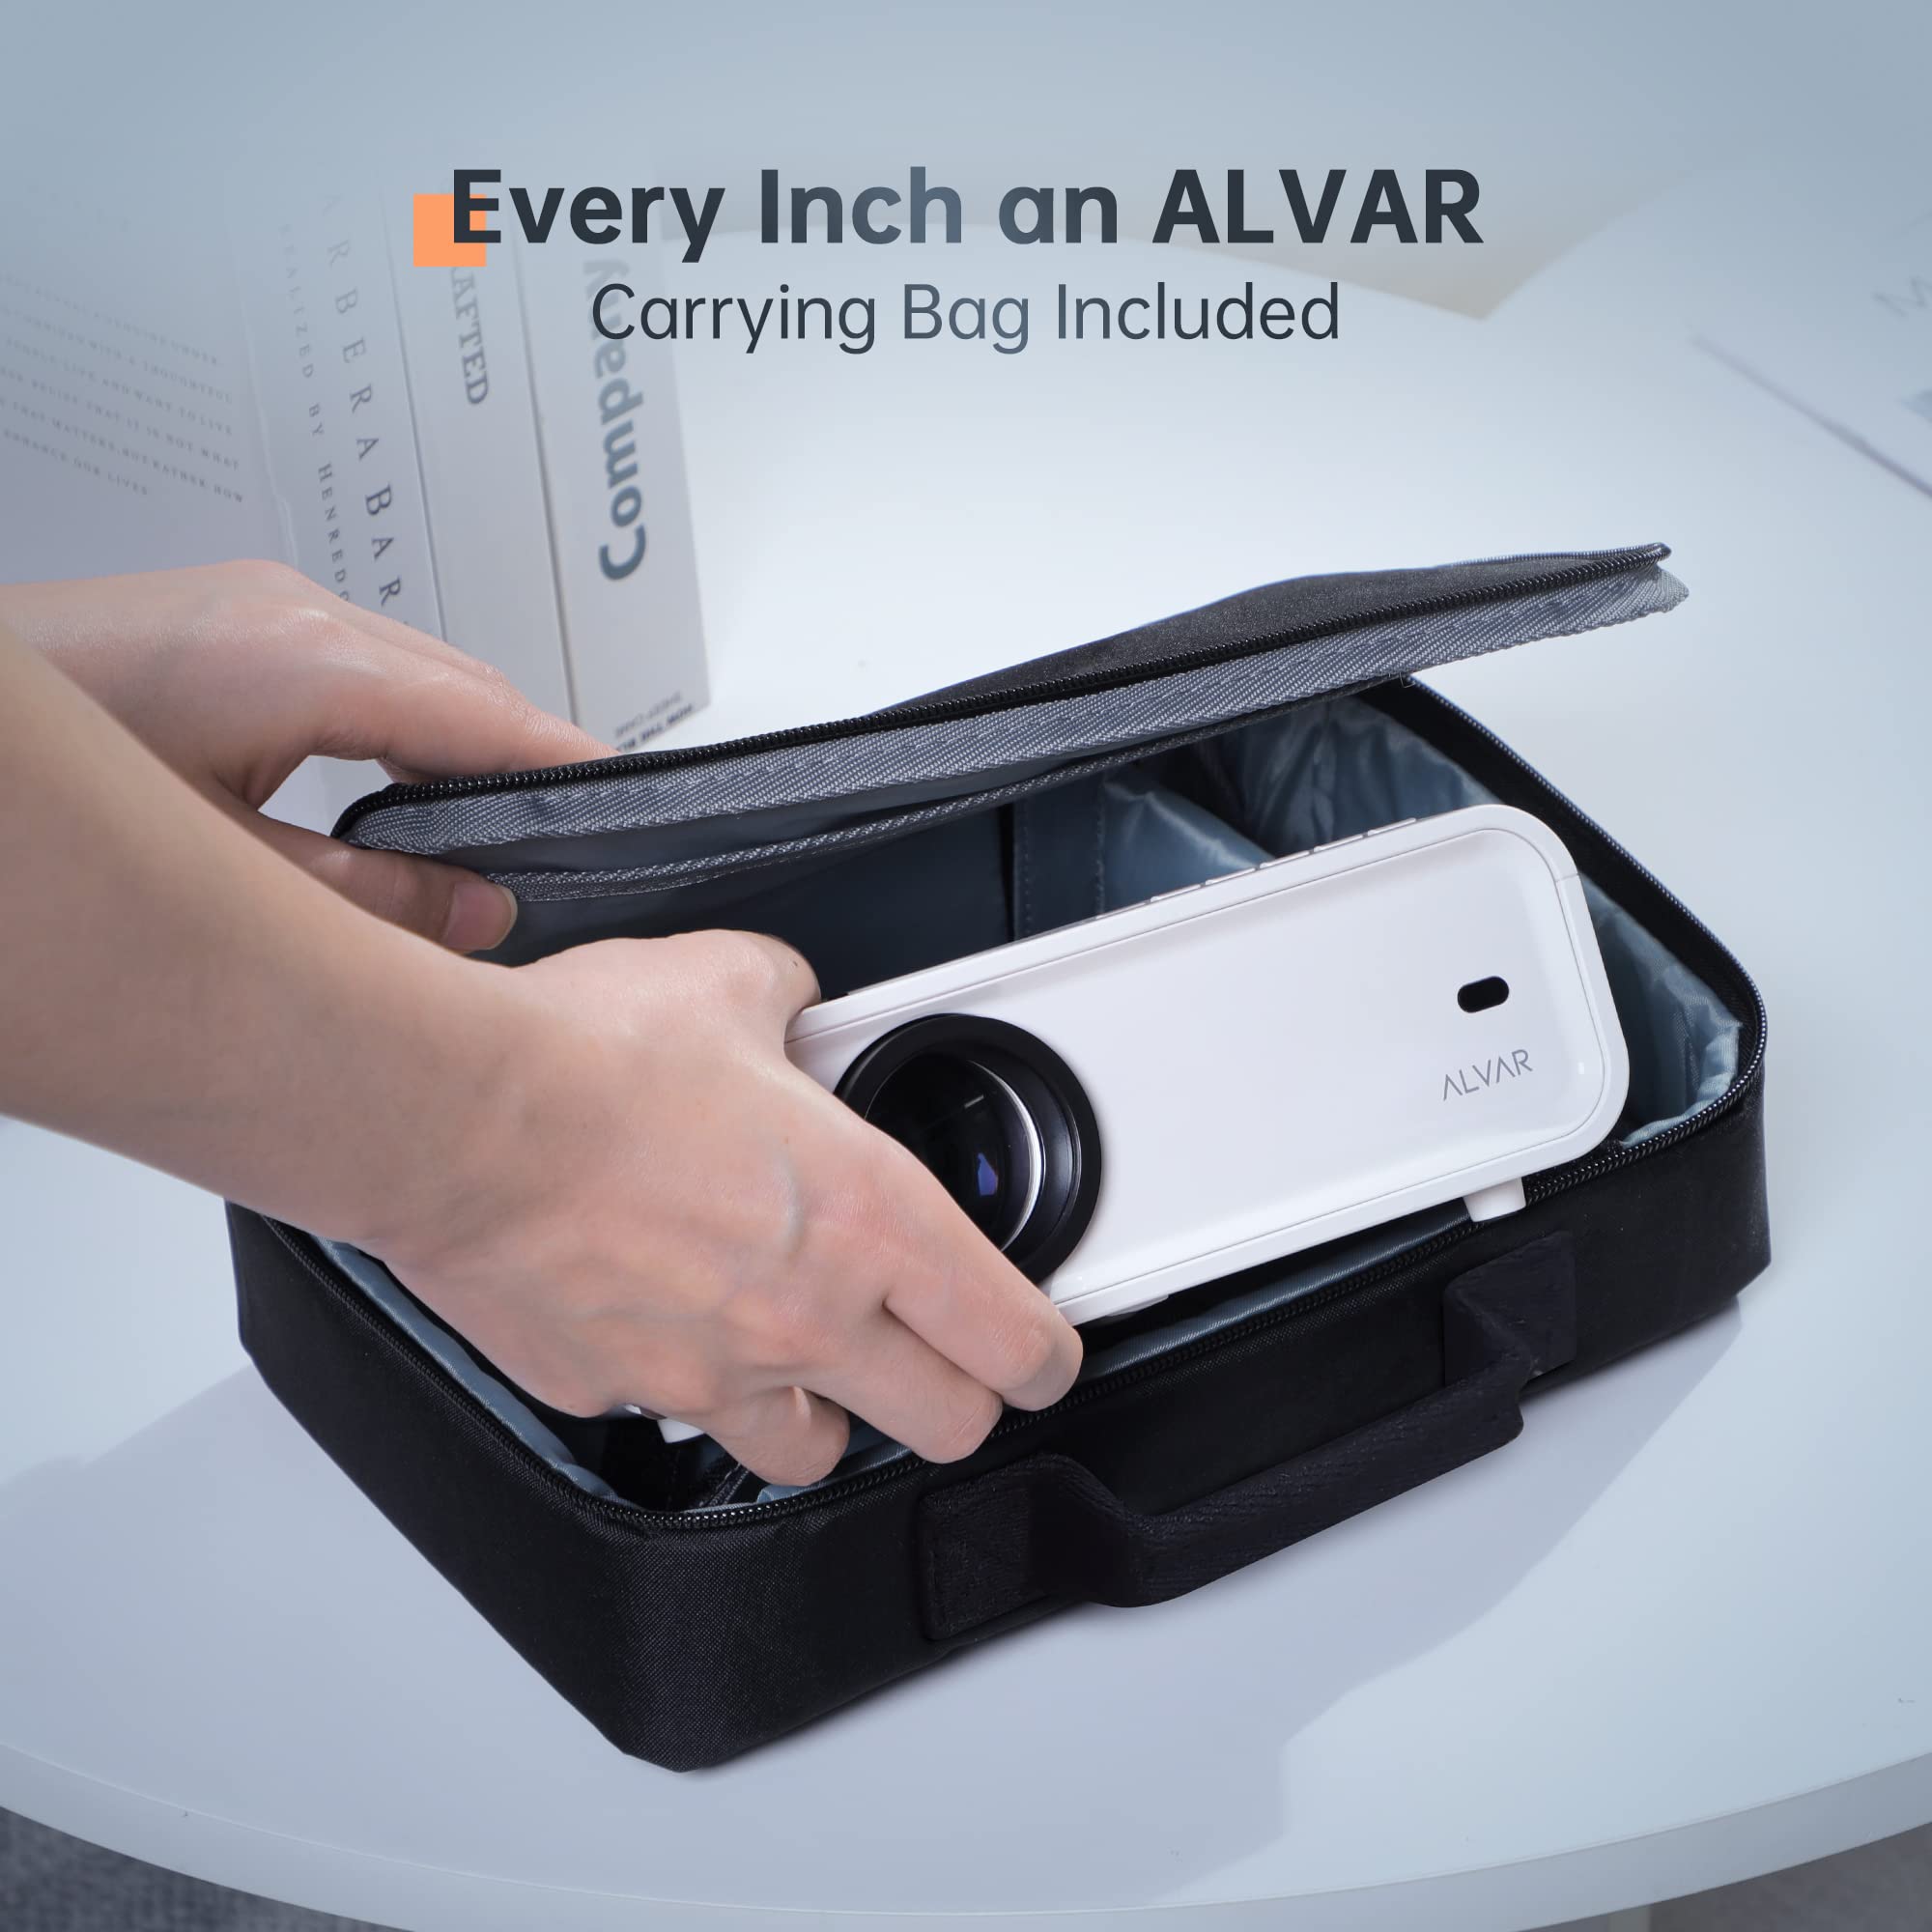 Mini Projector with 5G WiFi and Bluetooth W/Tripod & Bag, ALVAR 9000 Lumens Portable Outdoor Movie Projector 240